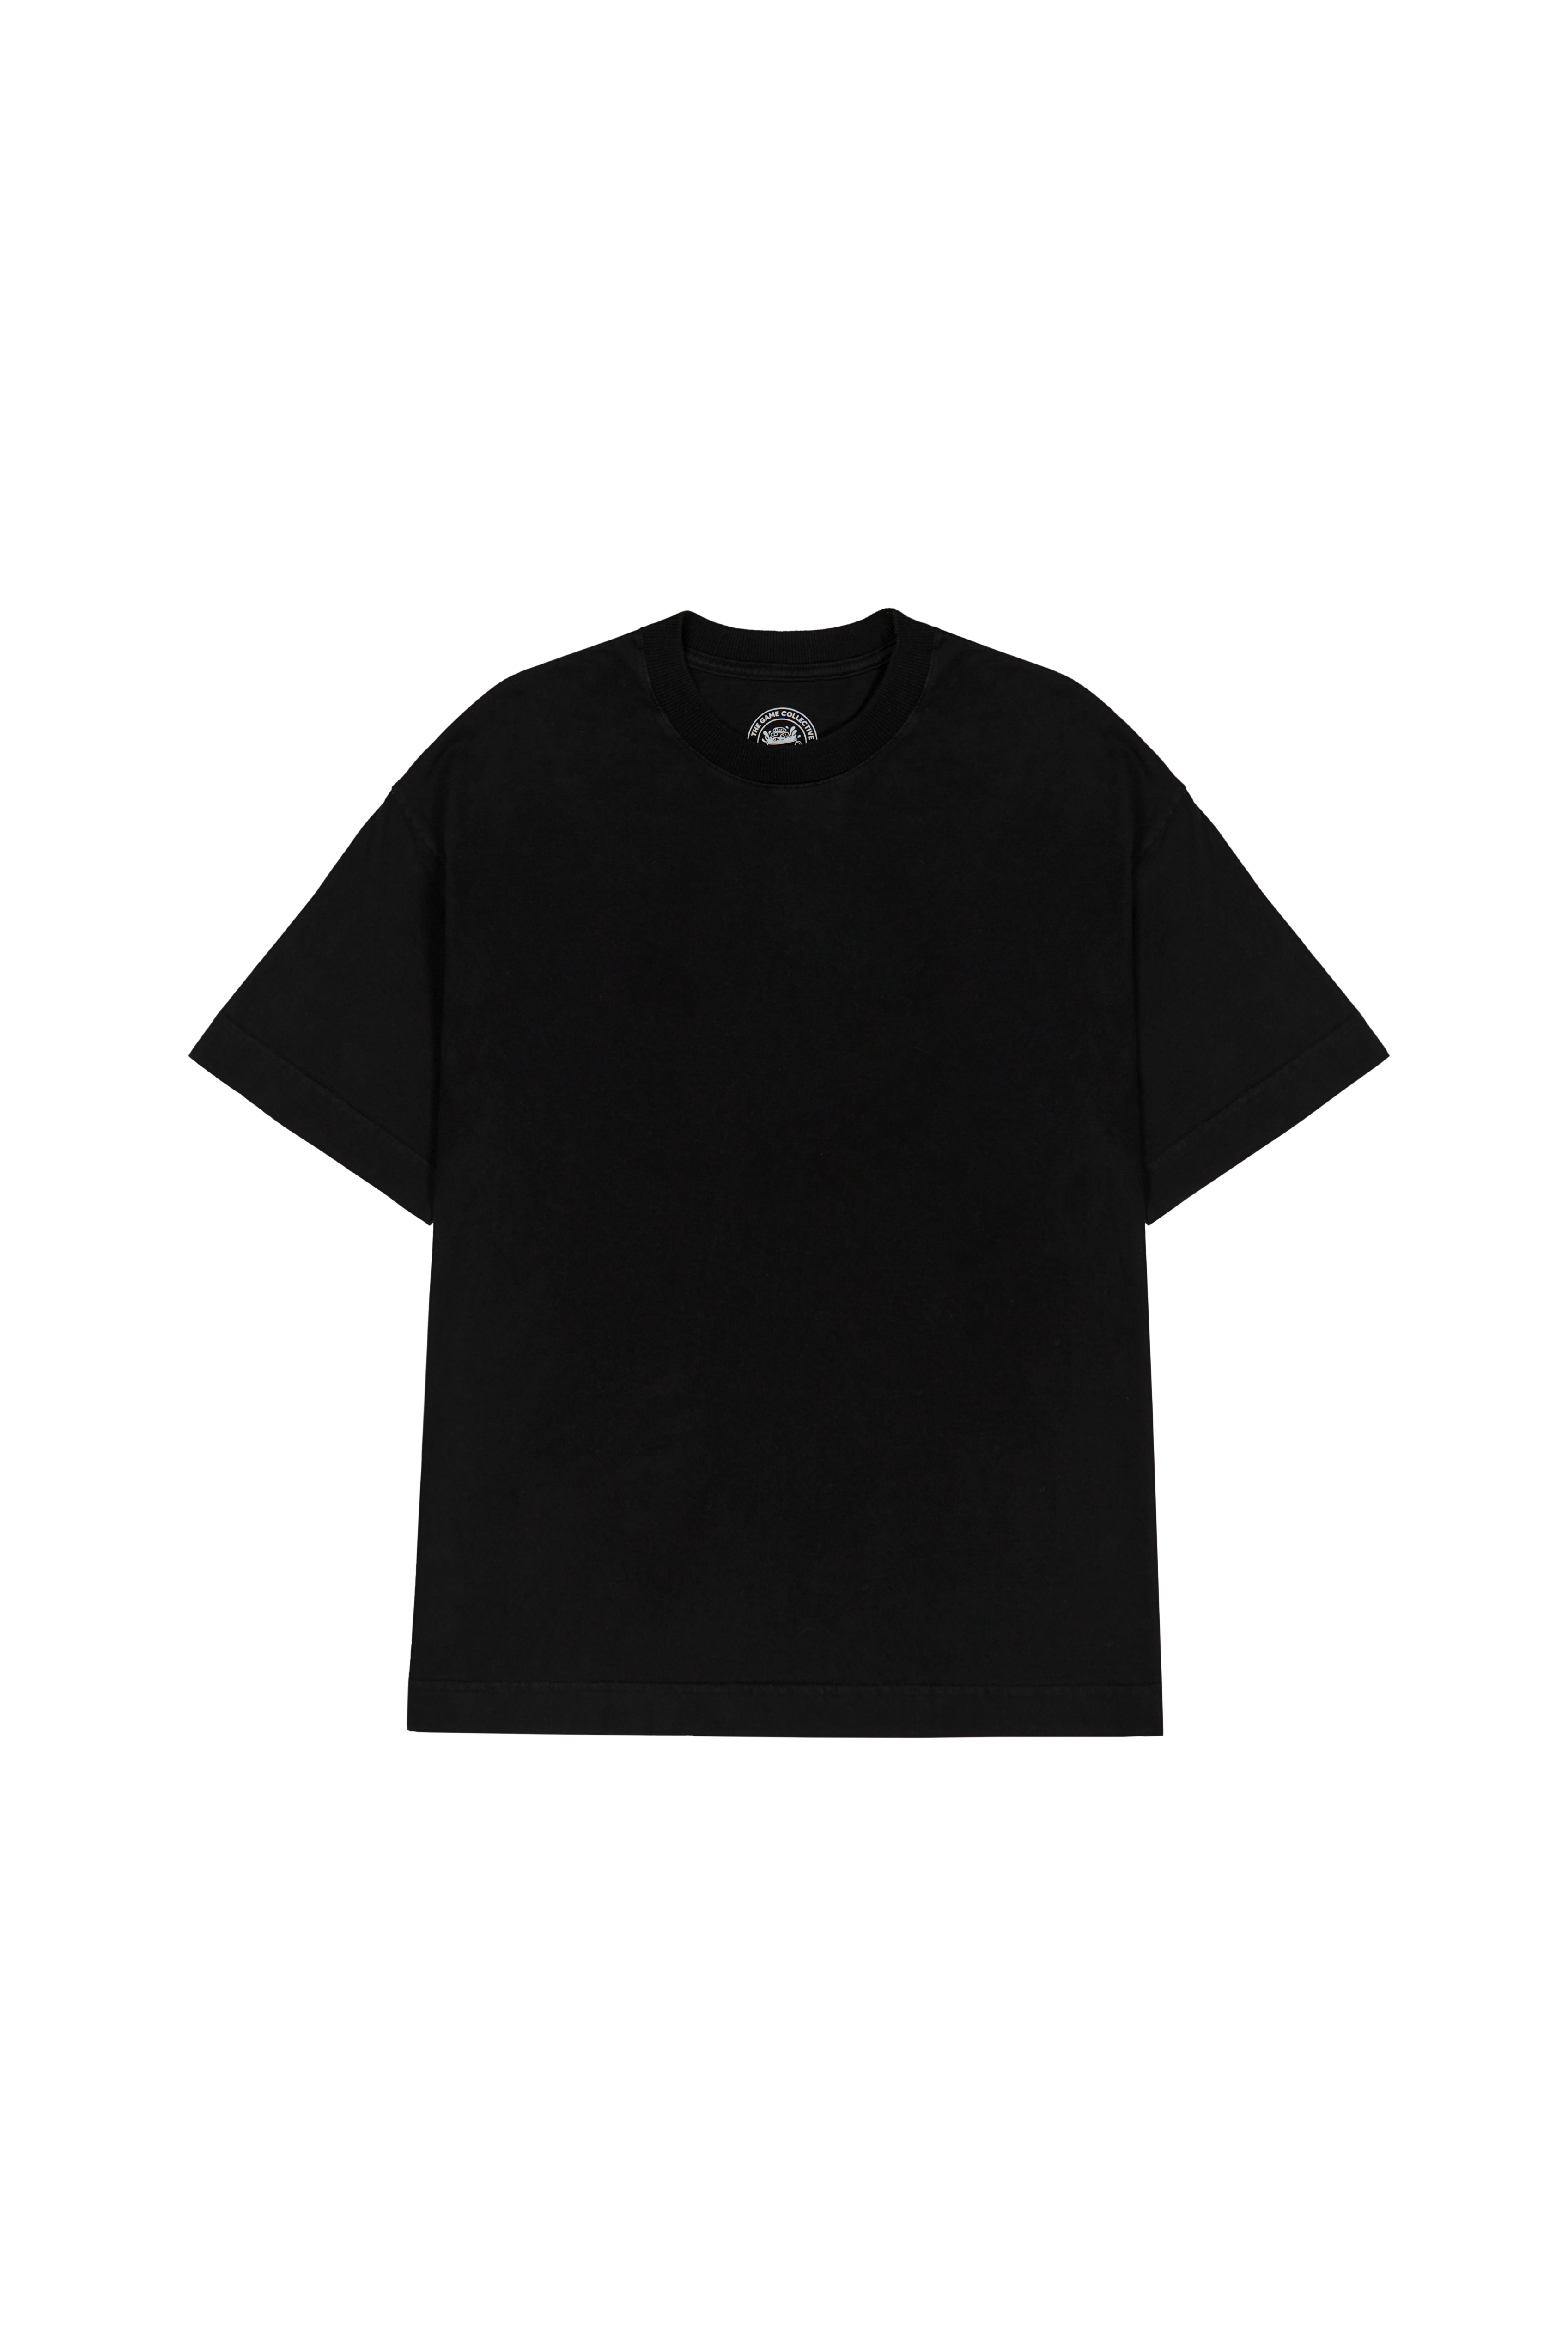 THE GAME - Not That Basic Tee® "Black" - THE GAME